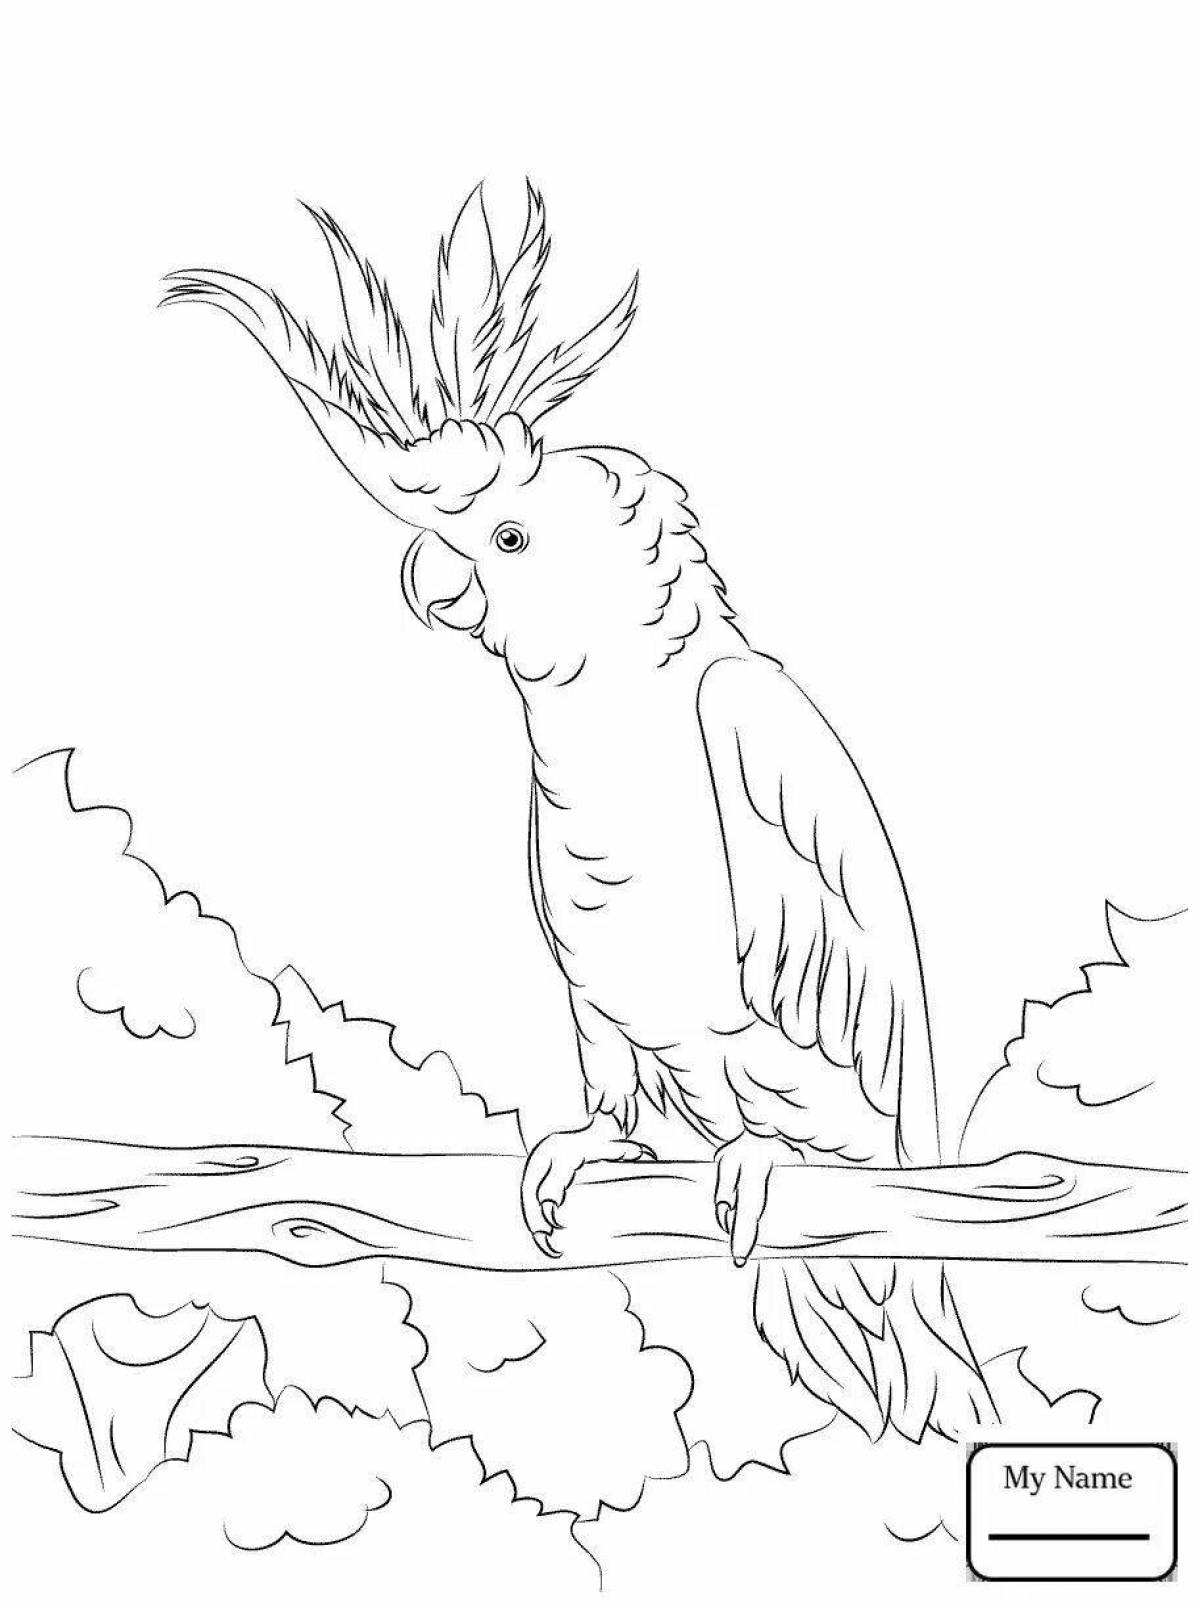 Coloring page of a sociable parrot